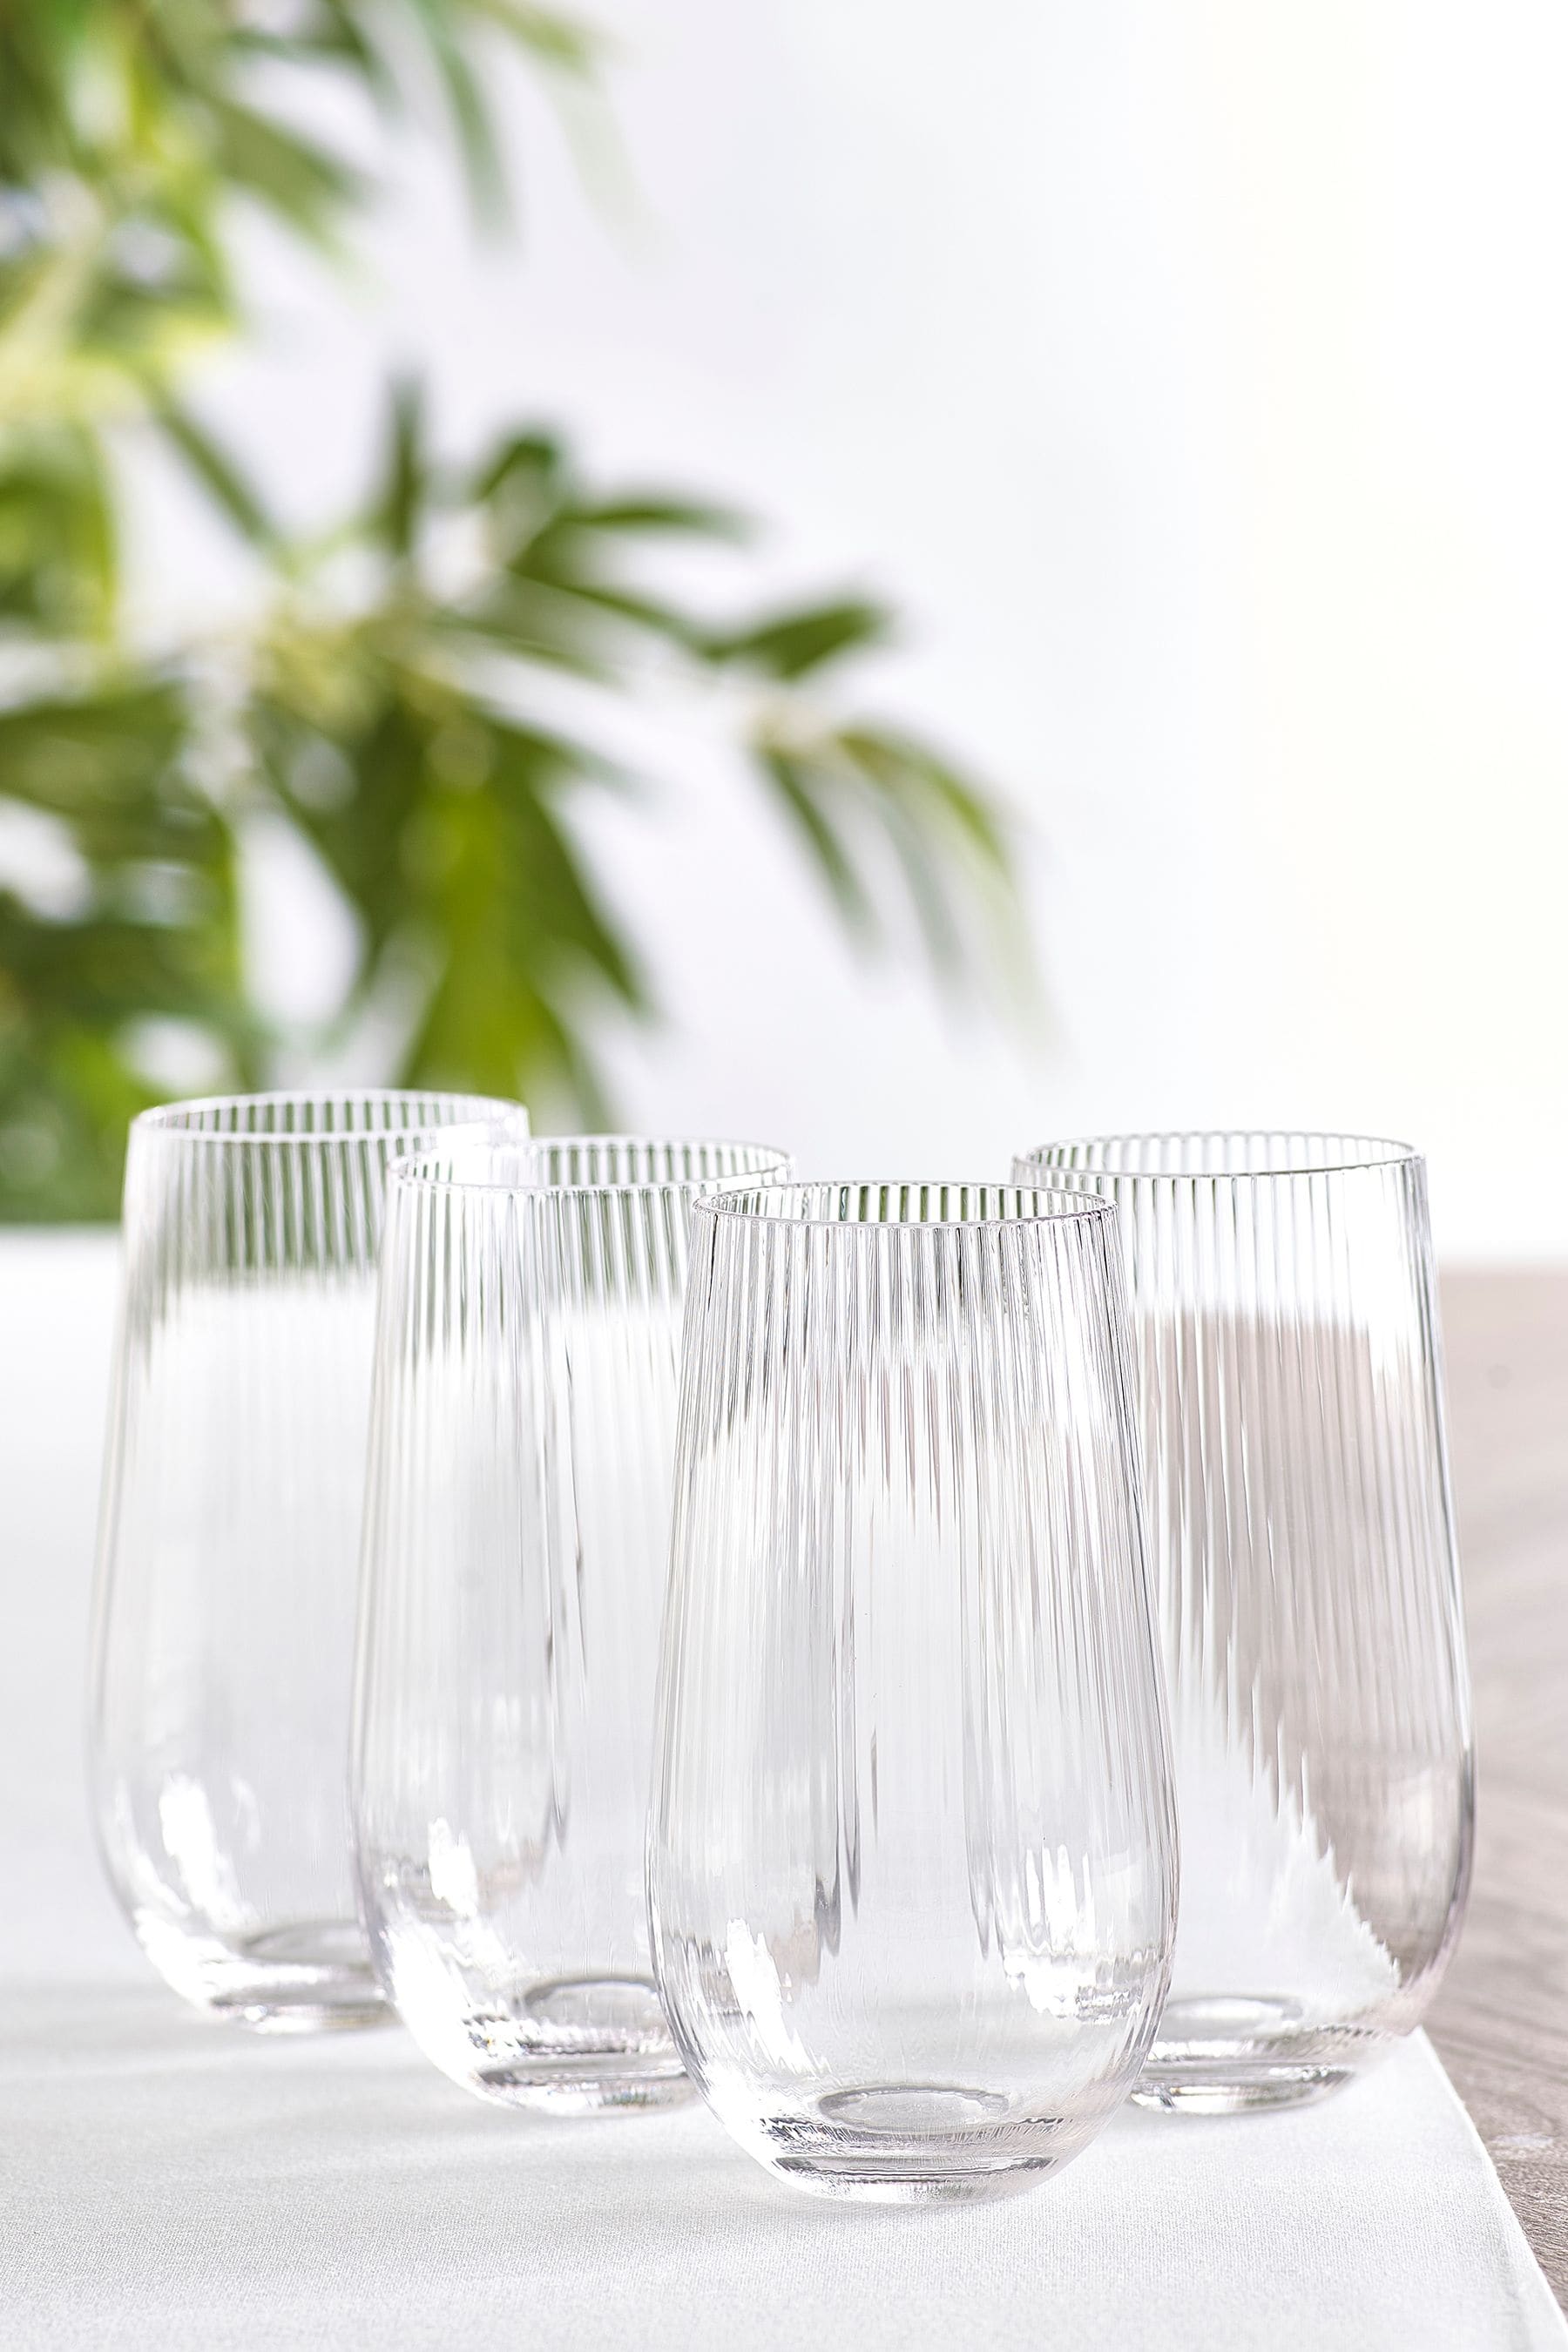 Clear Sienna Set of 4 Tall Tumbler Glasses